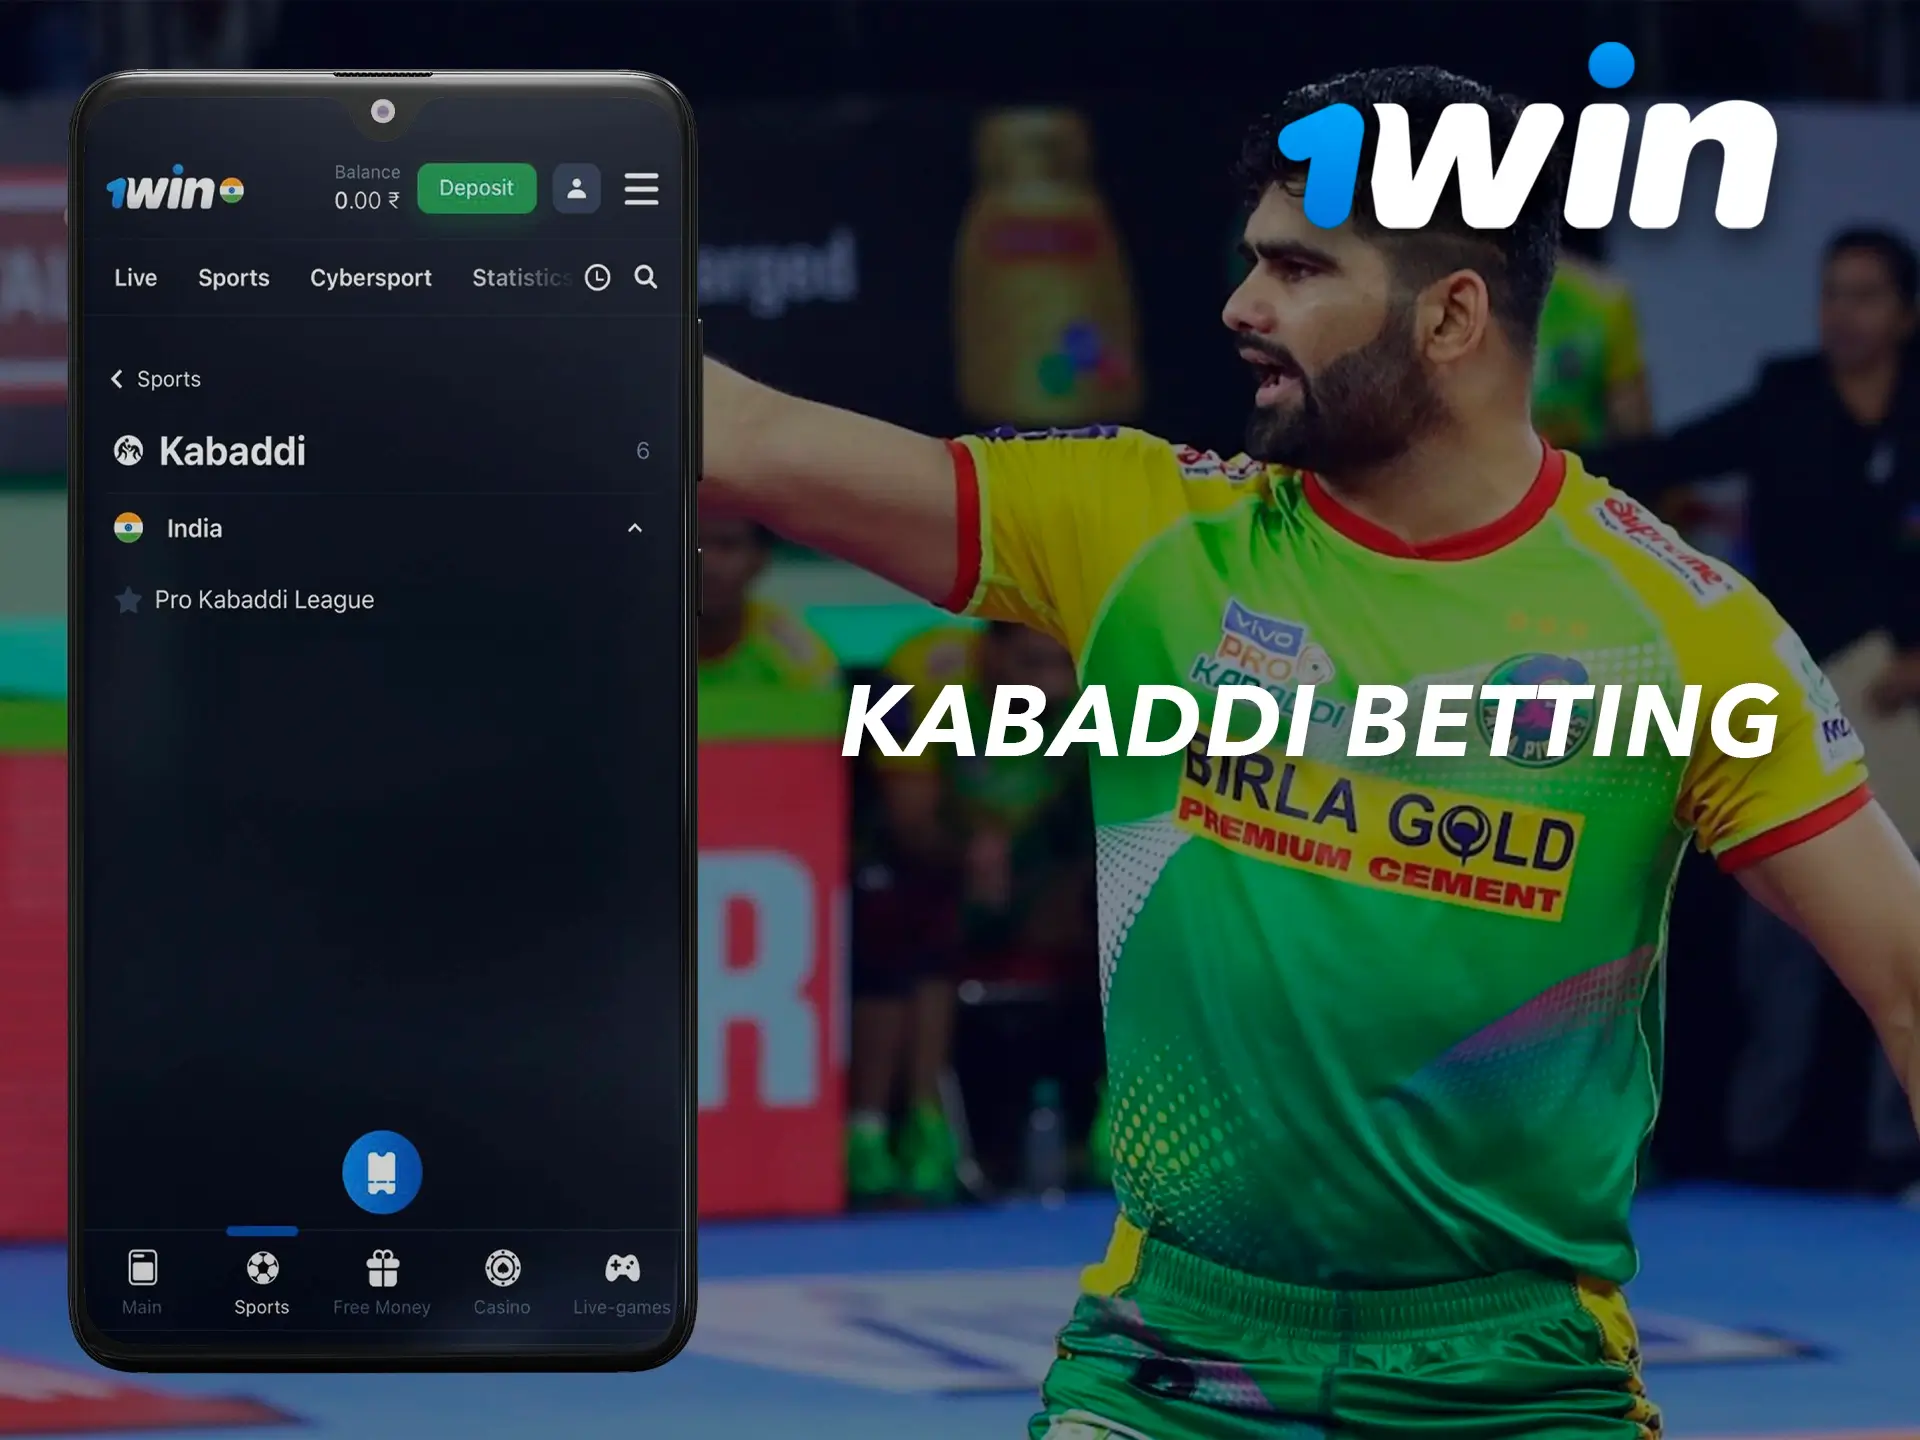 Kabaddi is fast gaining momentum in India and it is just as available for betting at 1Win.